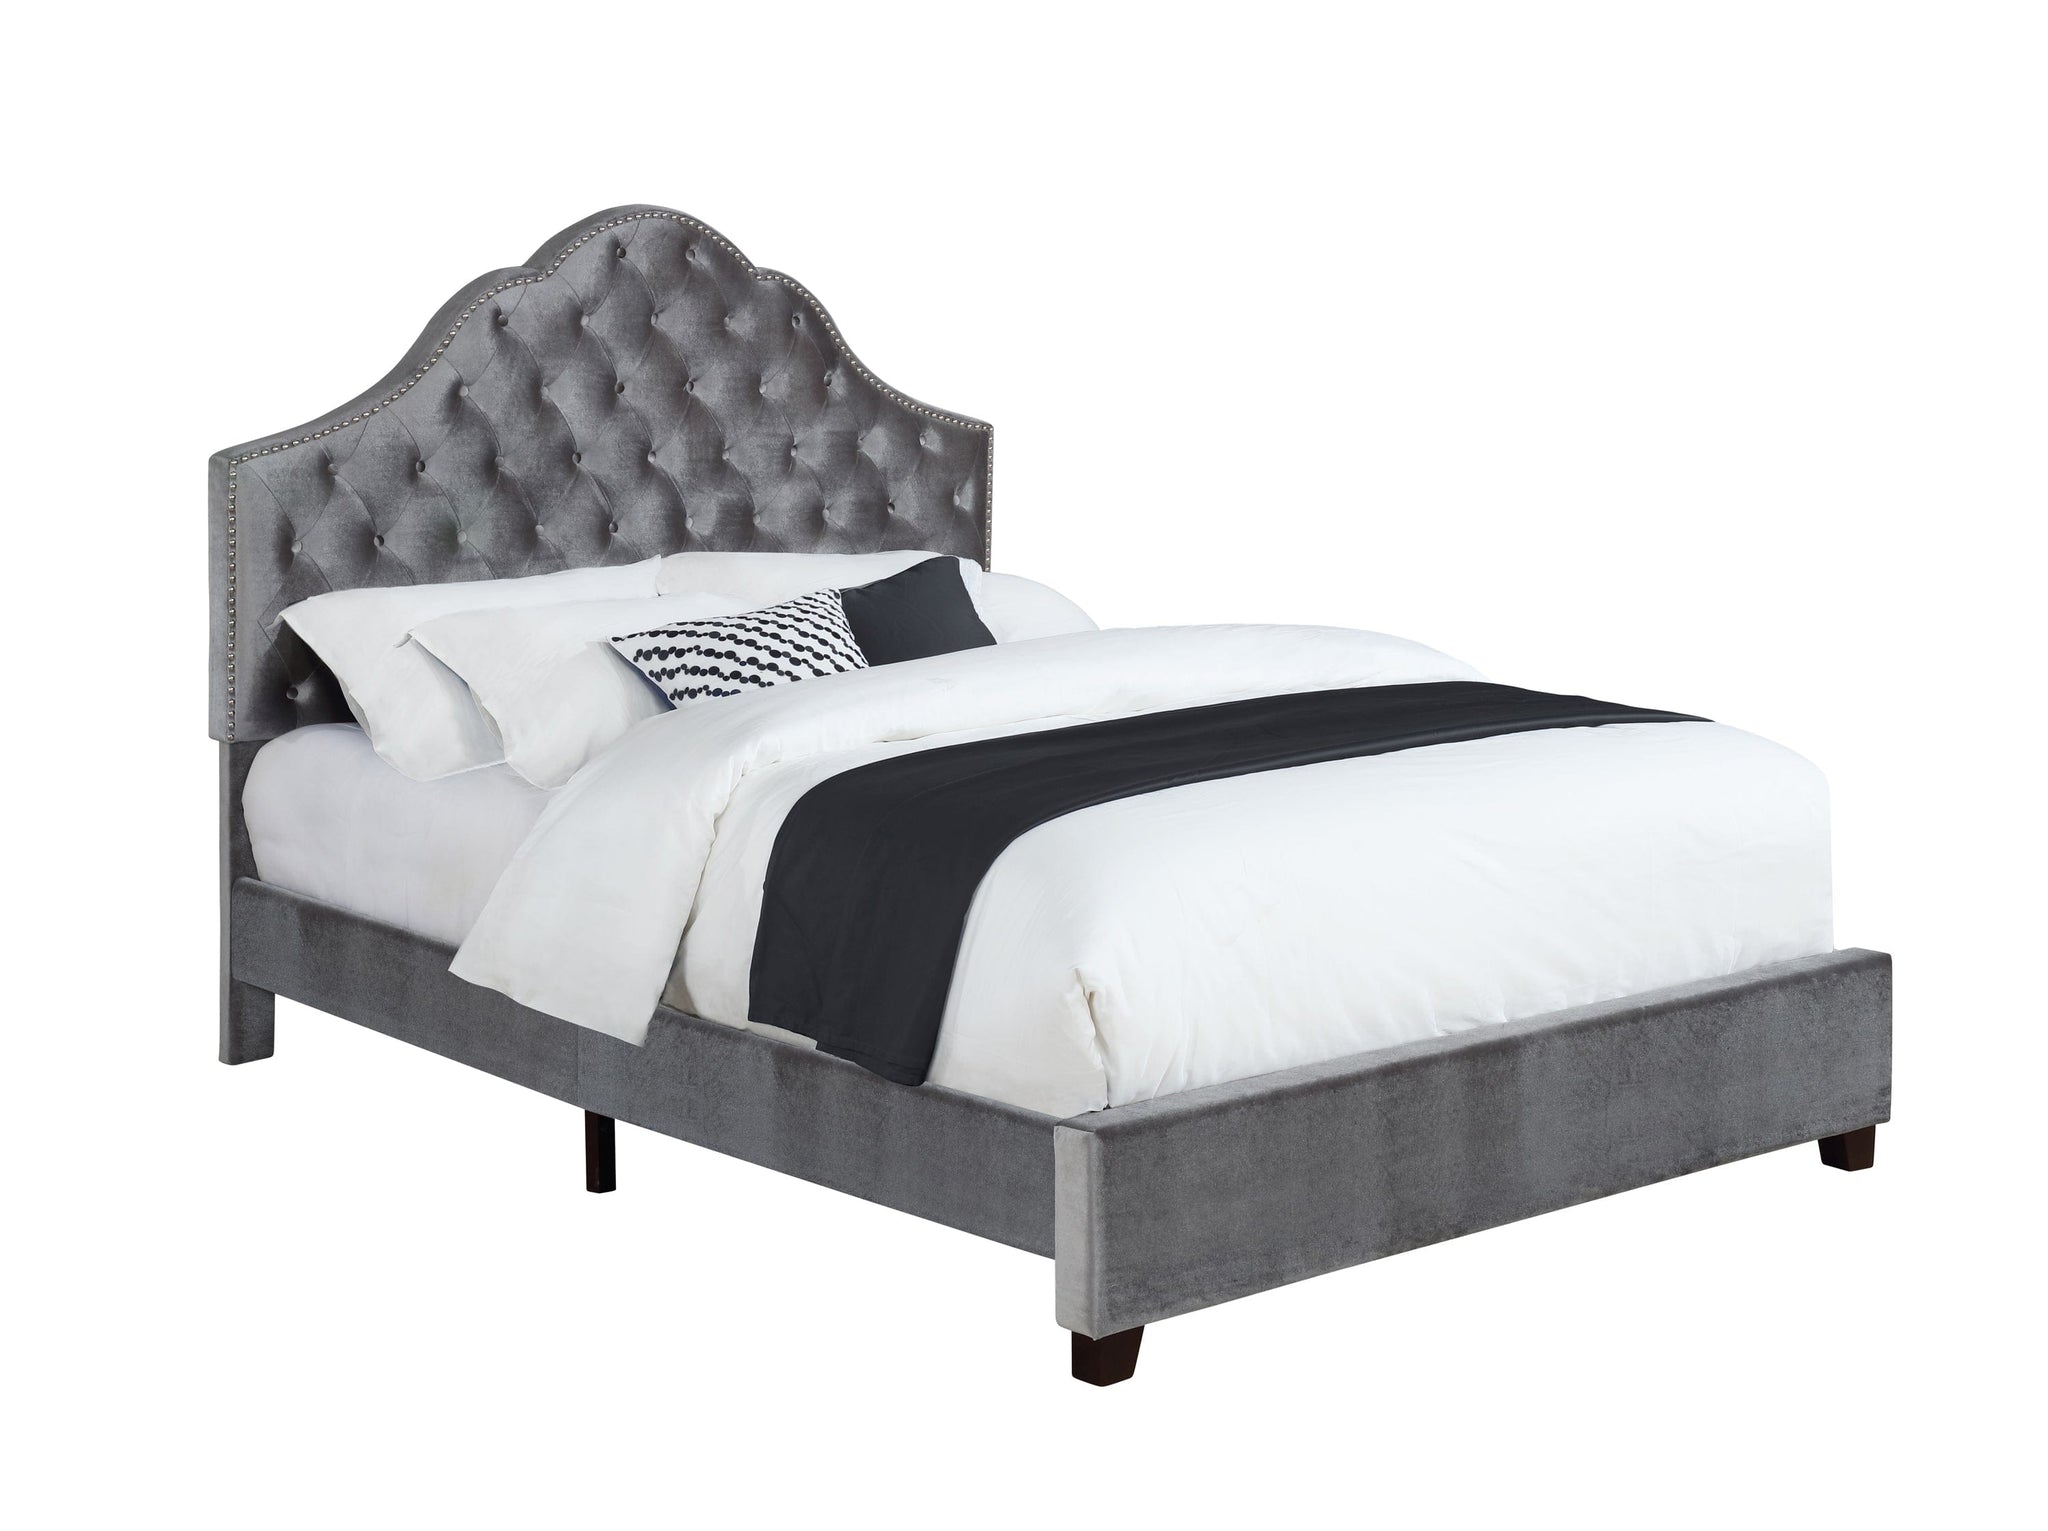 Abbeville Full Upholstered Bed With Arched Headboard Grey - 315891F